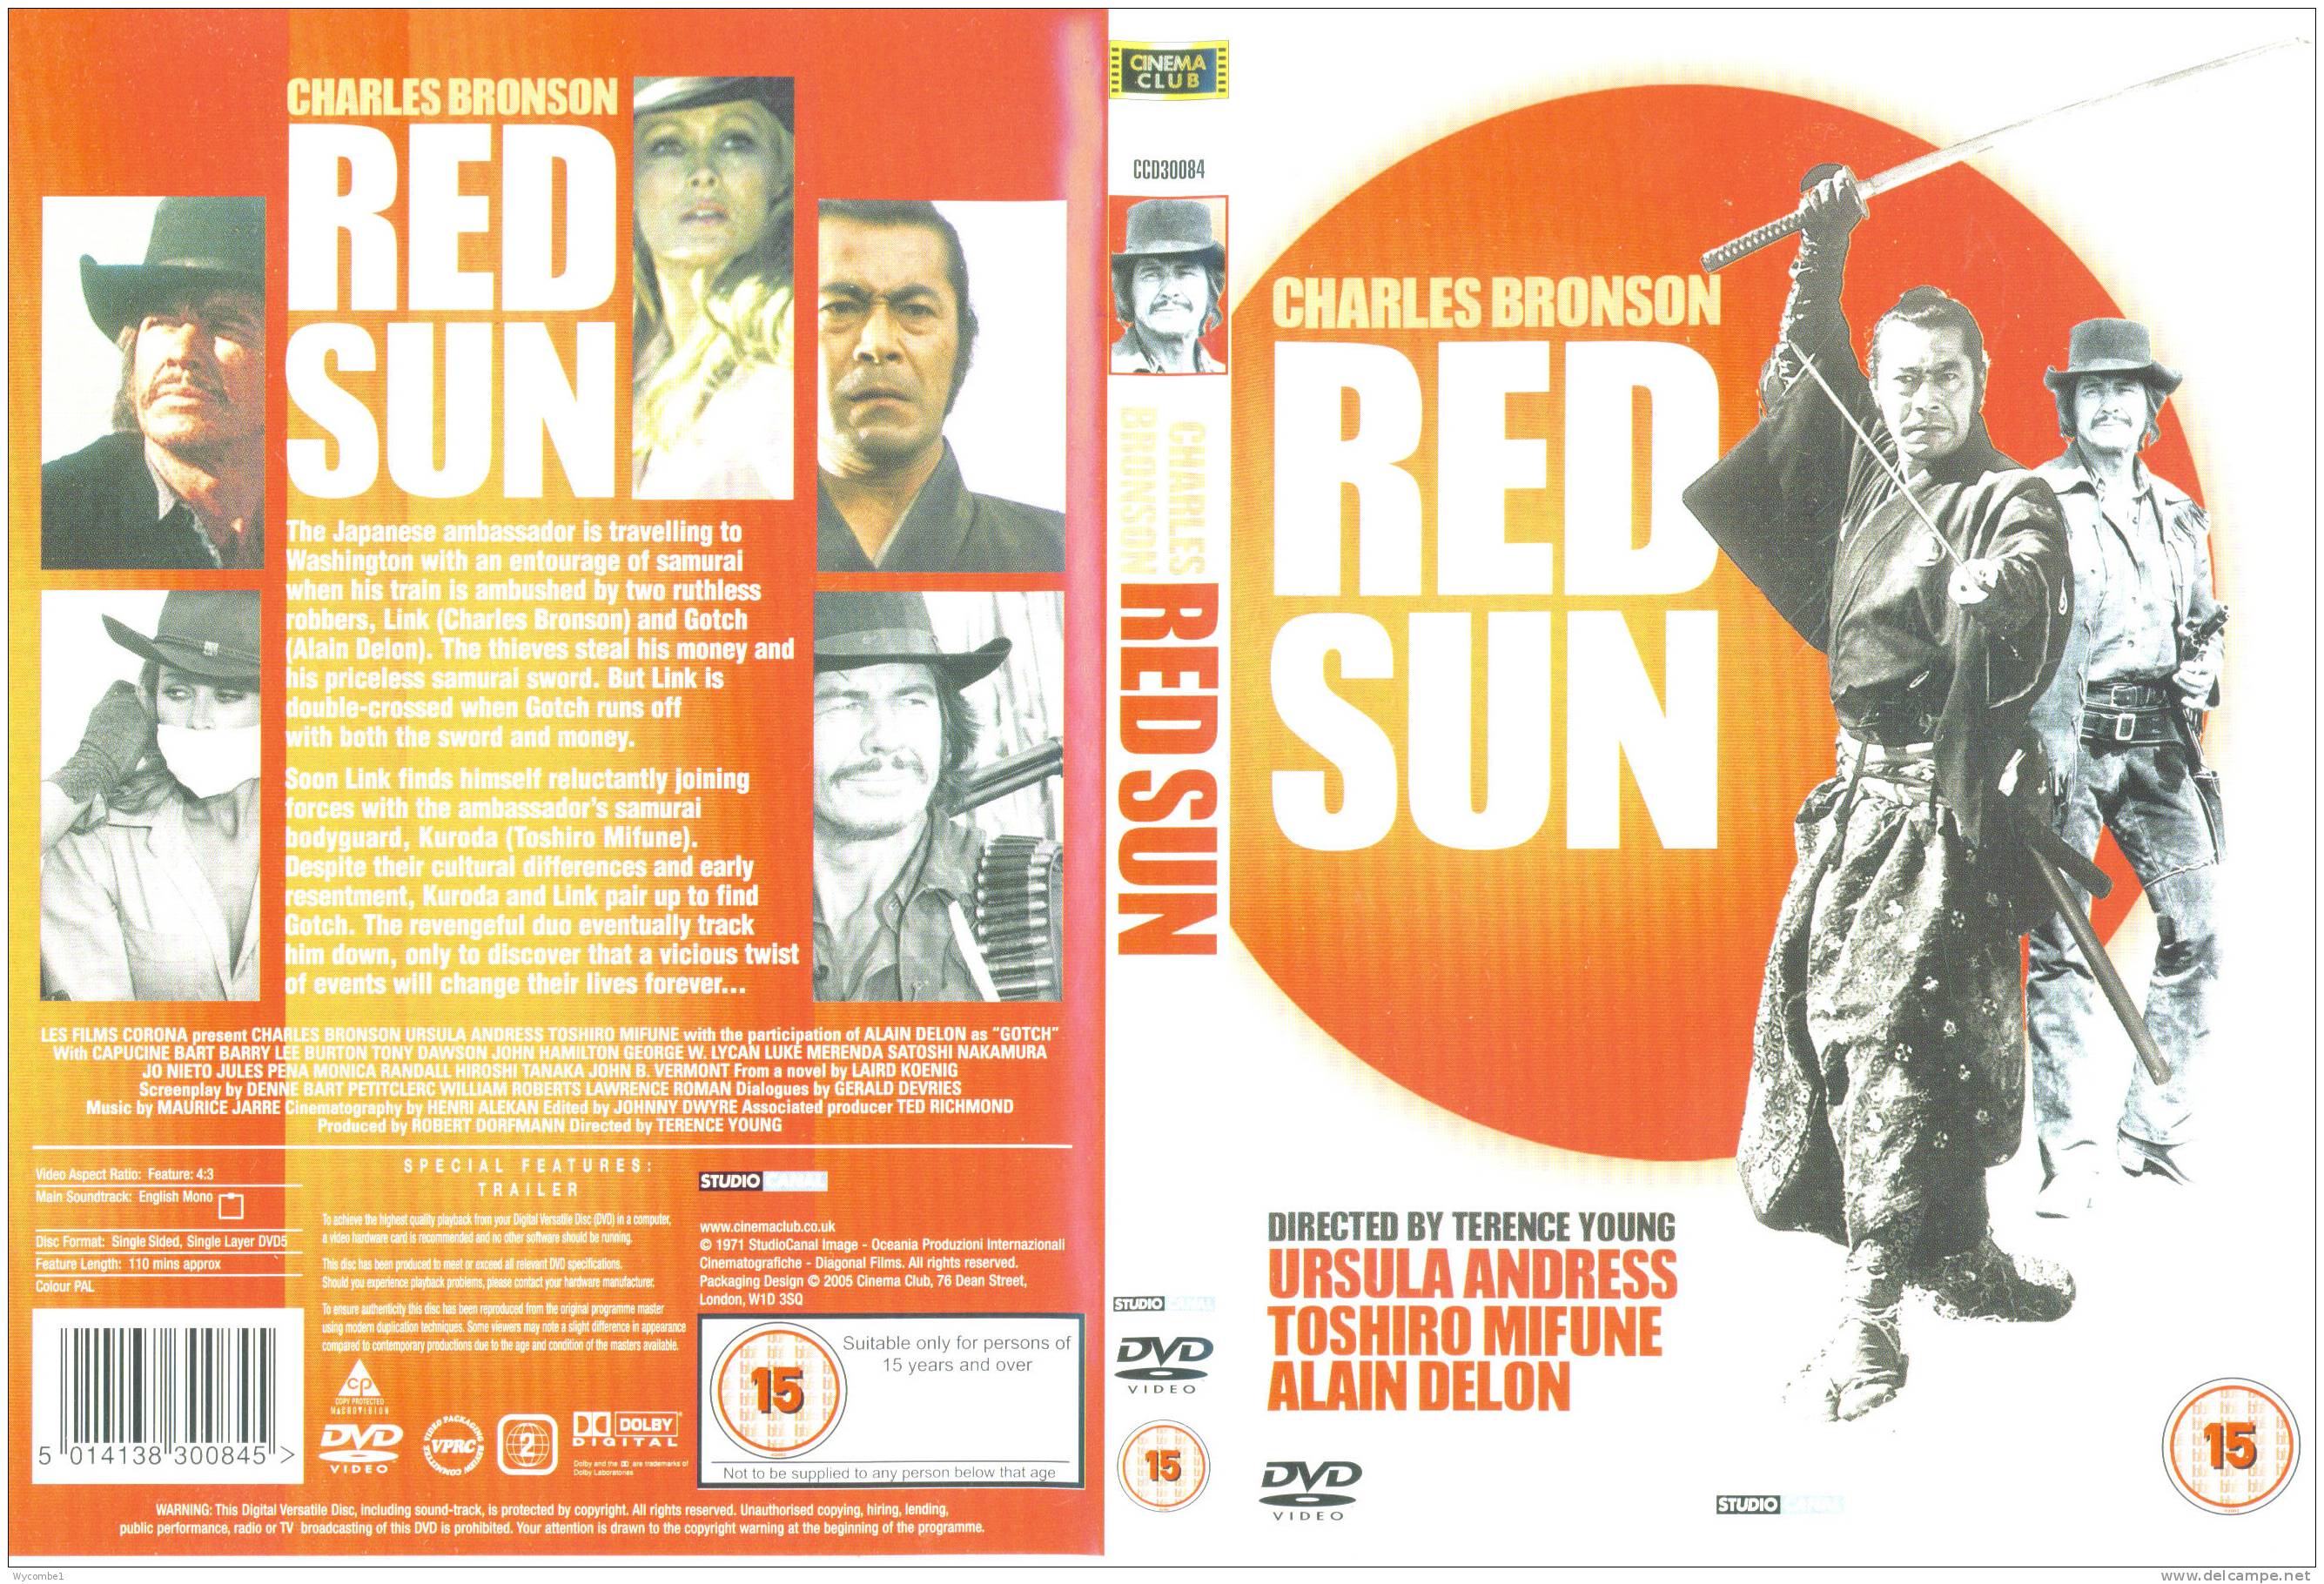 RED SUN - Charles Bronson (Details As Scan) - Western/ Cowboy